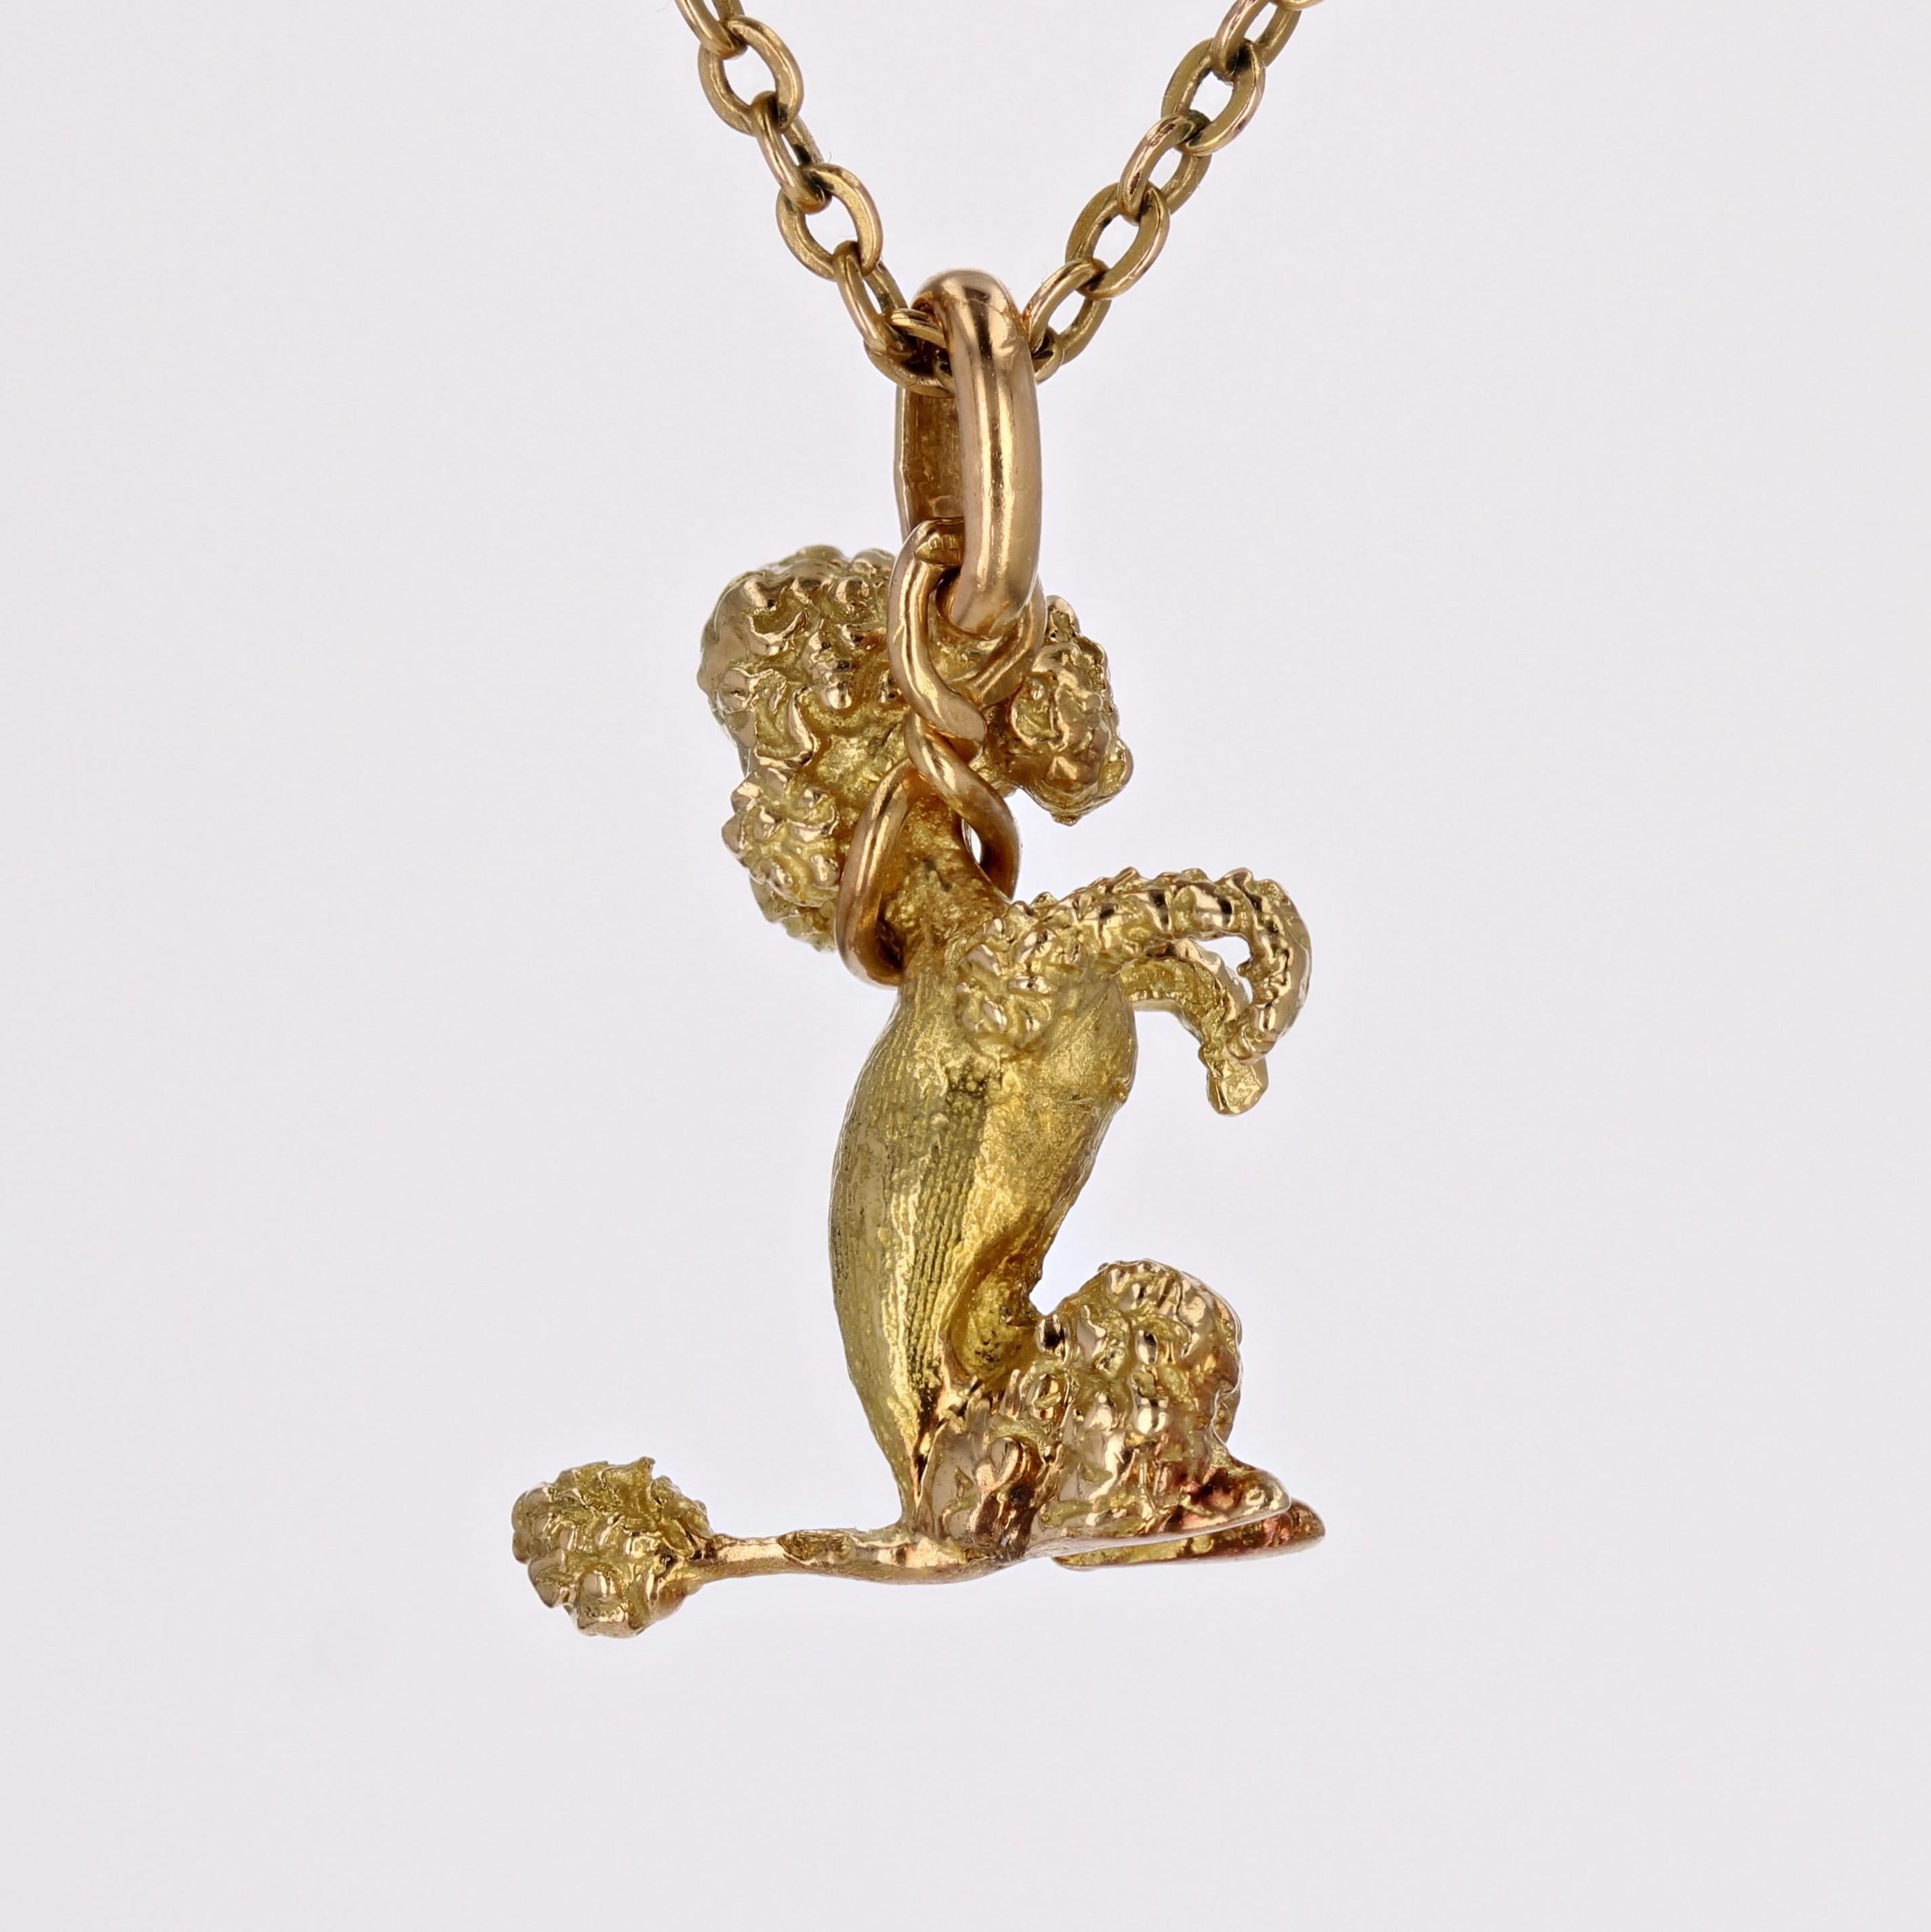 French 1960s 18 Karat Yellow Gold Sitting Poodle Charm Pendant For Sale 1